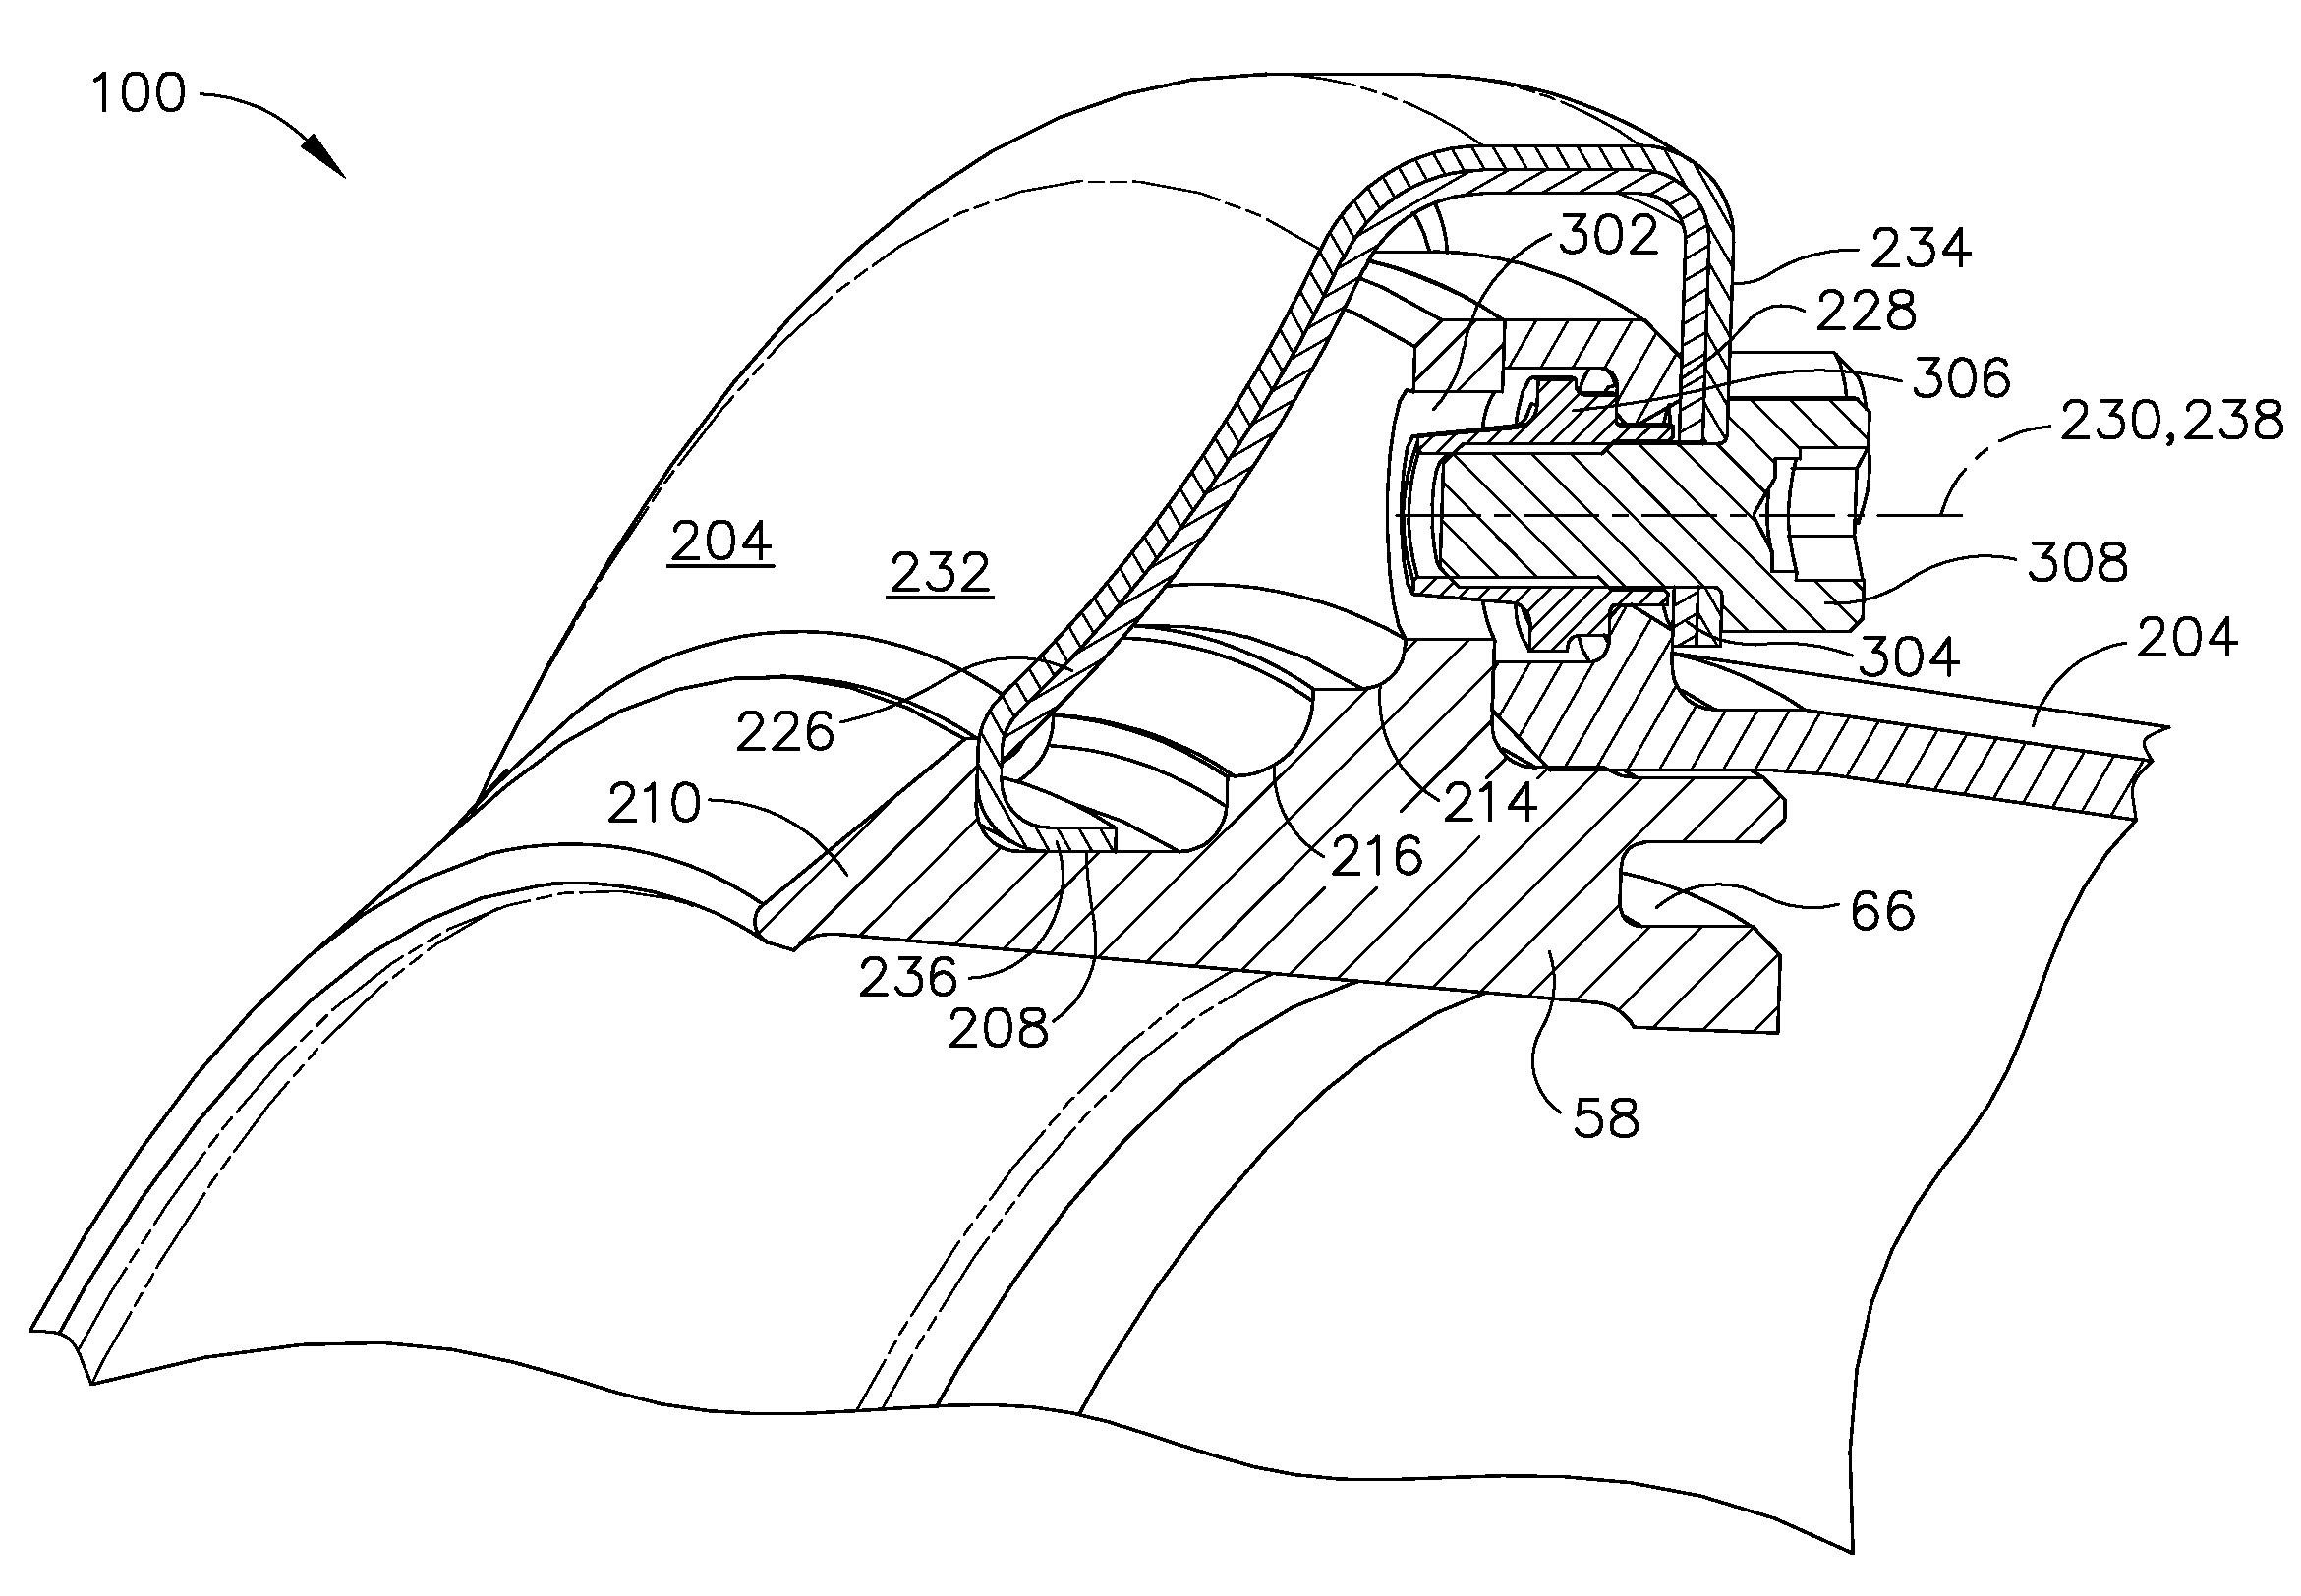 Method and apparatus to facilitate reducing losses in turbine engines